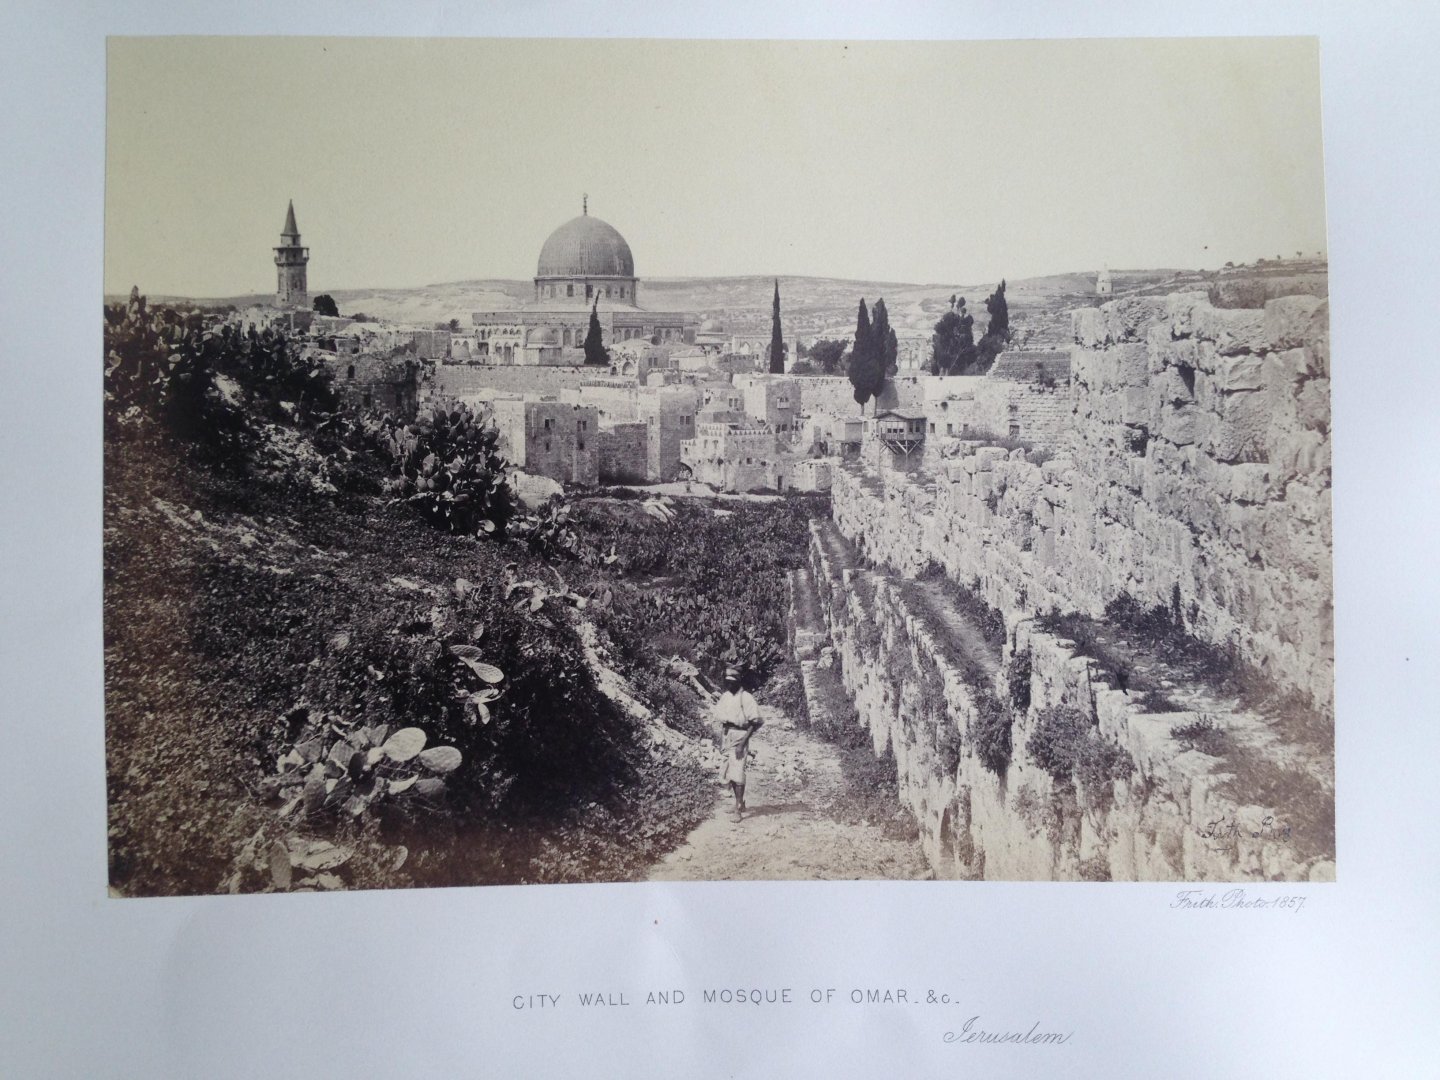 Frith, Francis - City Wall and Mosque of Omar & c, Jerusalem, Series Egypt and Palestine